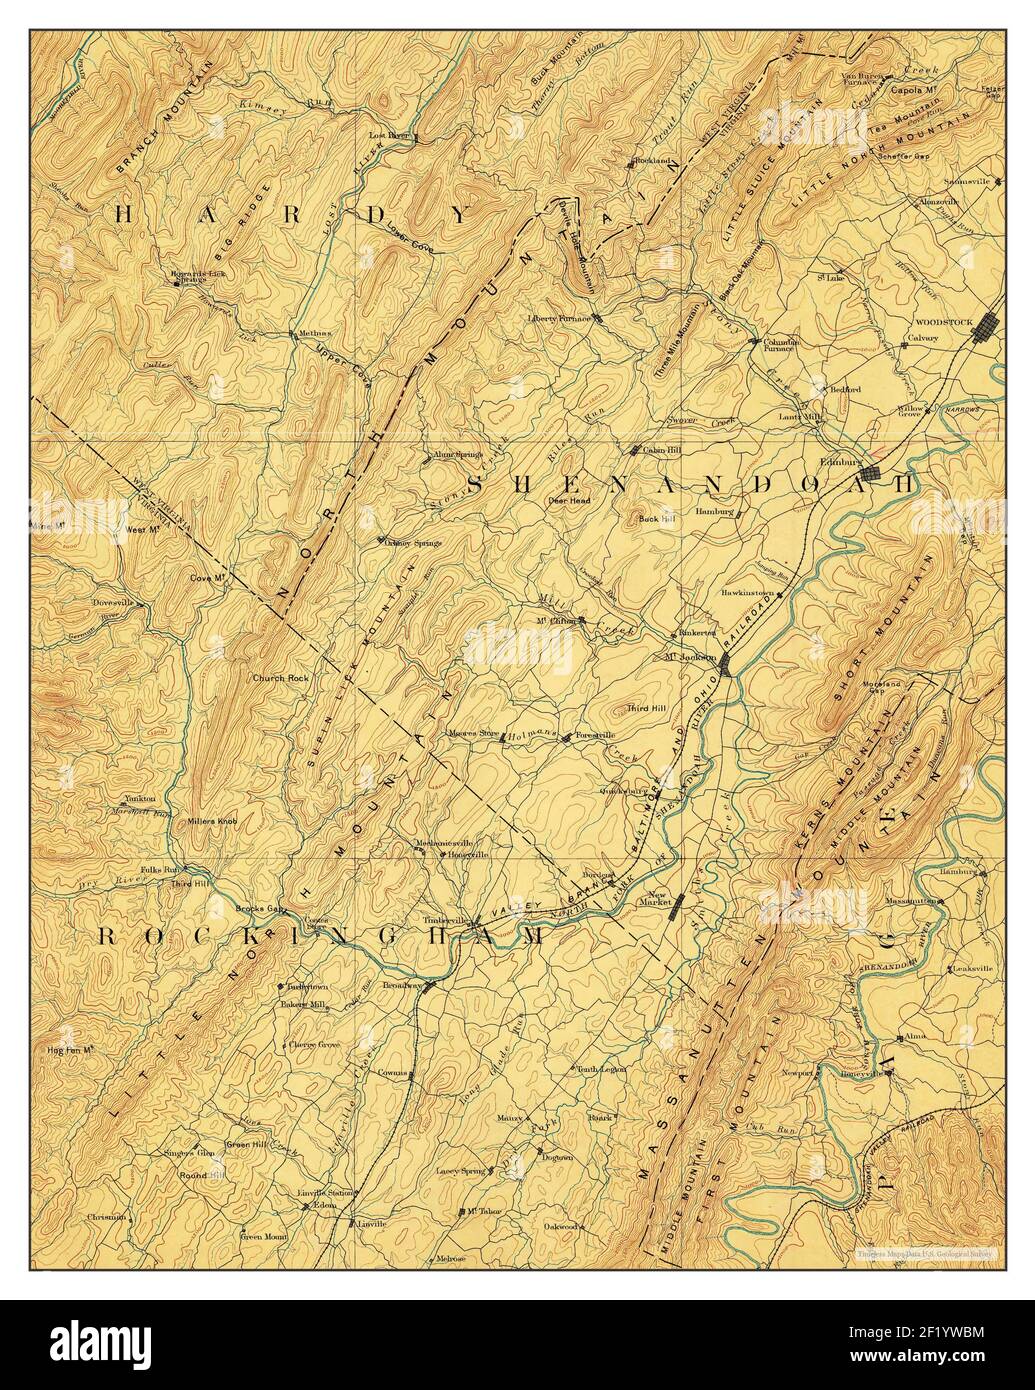 Woodstock, Virginia, map 1892, 1:125000, United States of America by Timeless Maps, data U.S. Geological Survey Stock Photo